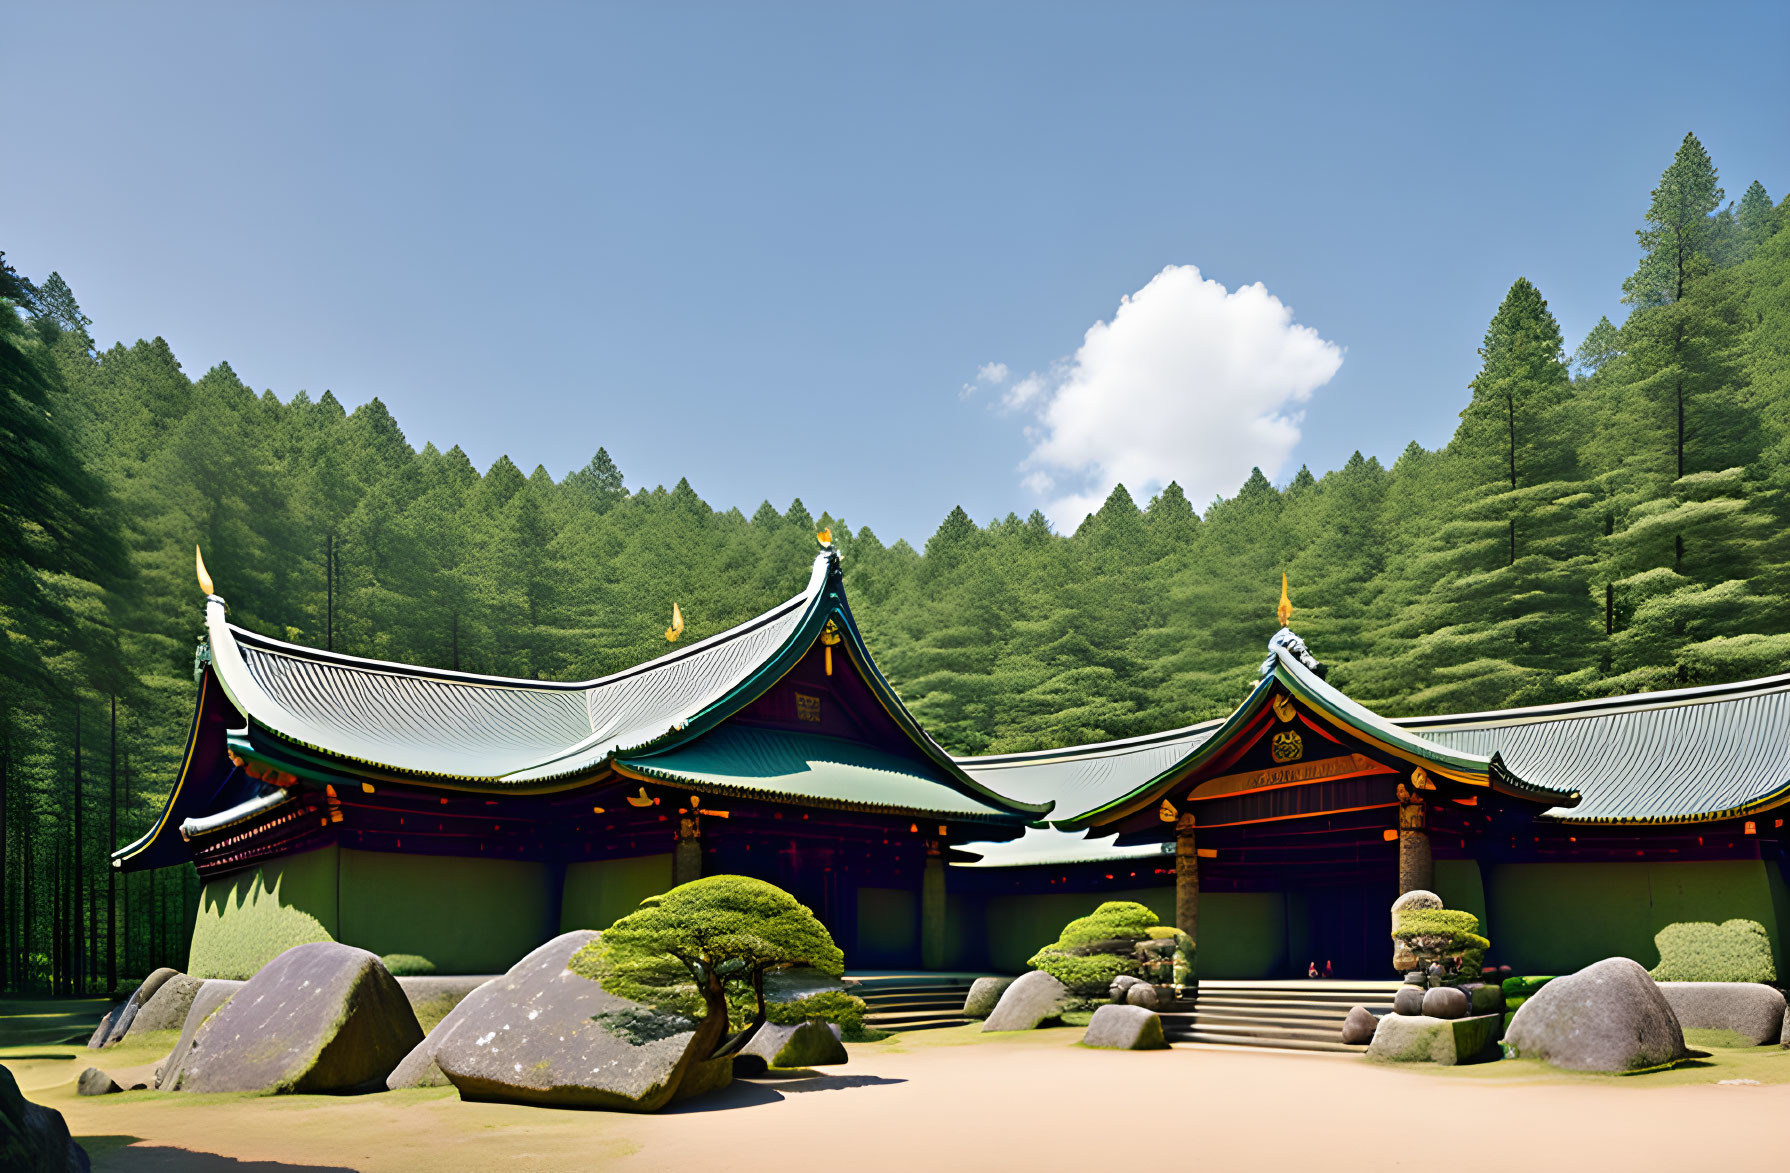 The shrine was surrounded by forest